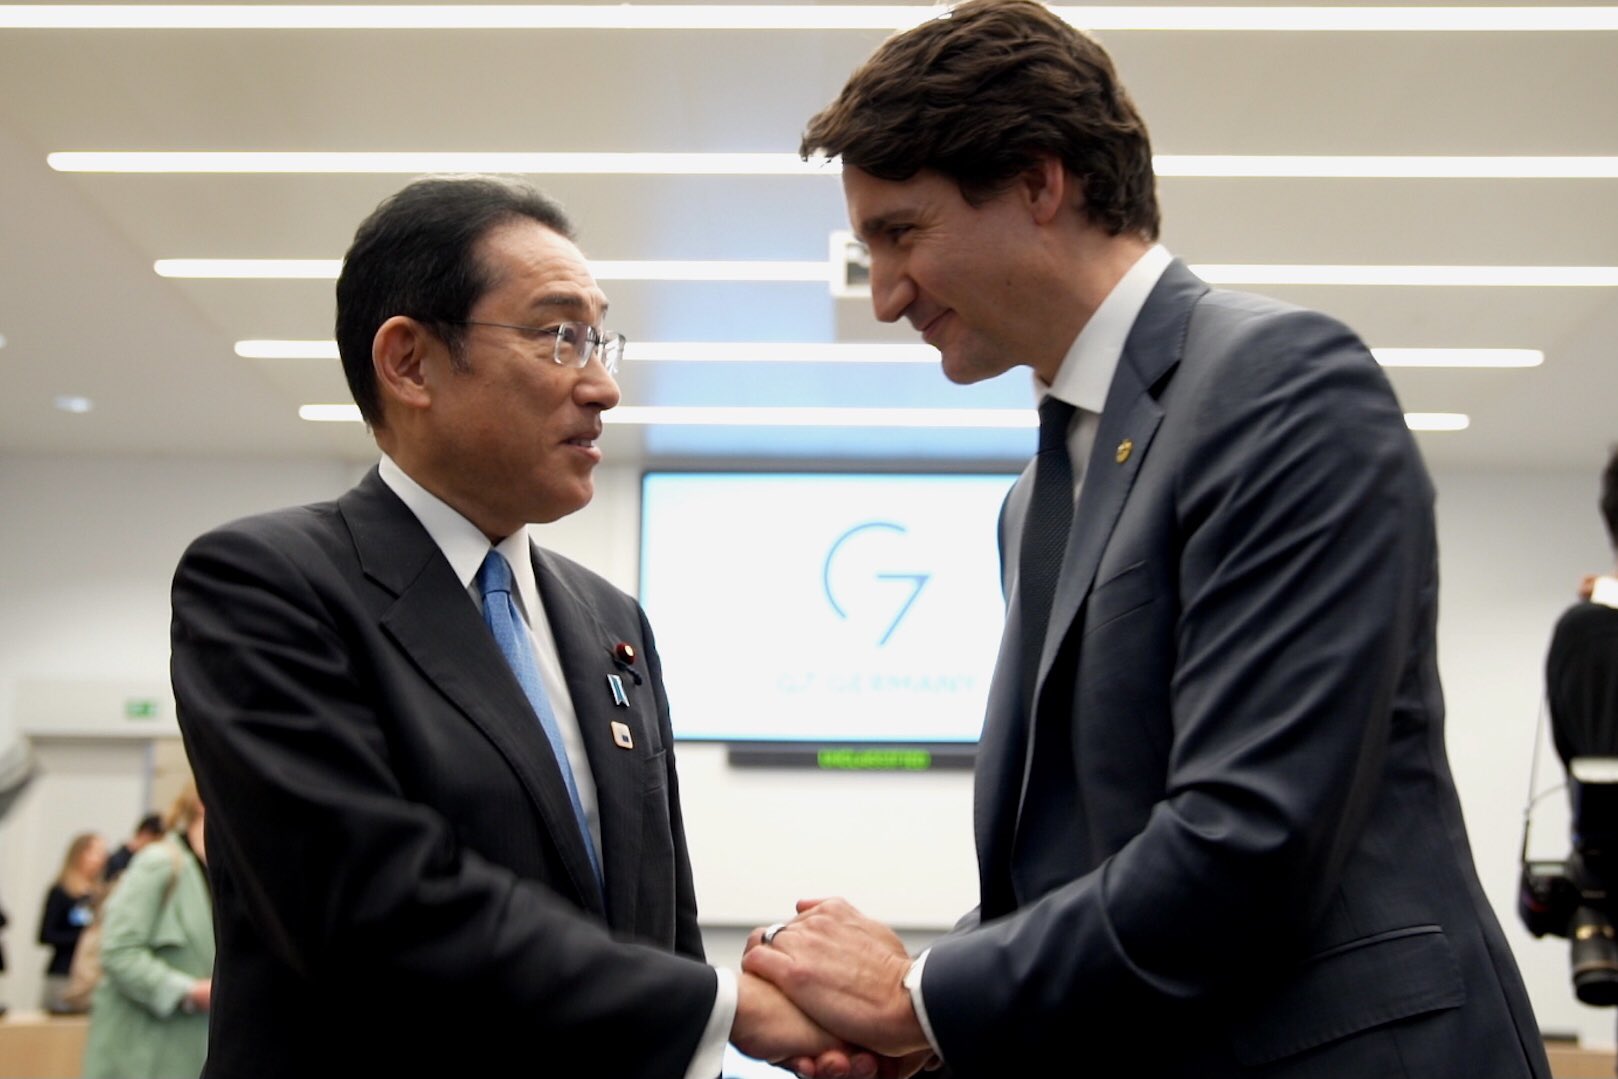 Prime Minister of Canada meets with Prime Minister of Japan